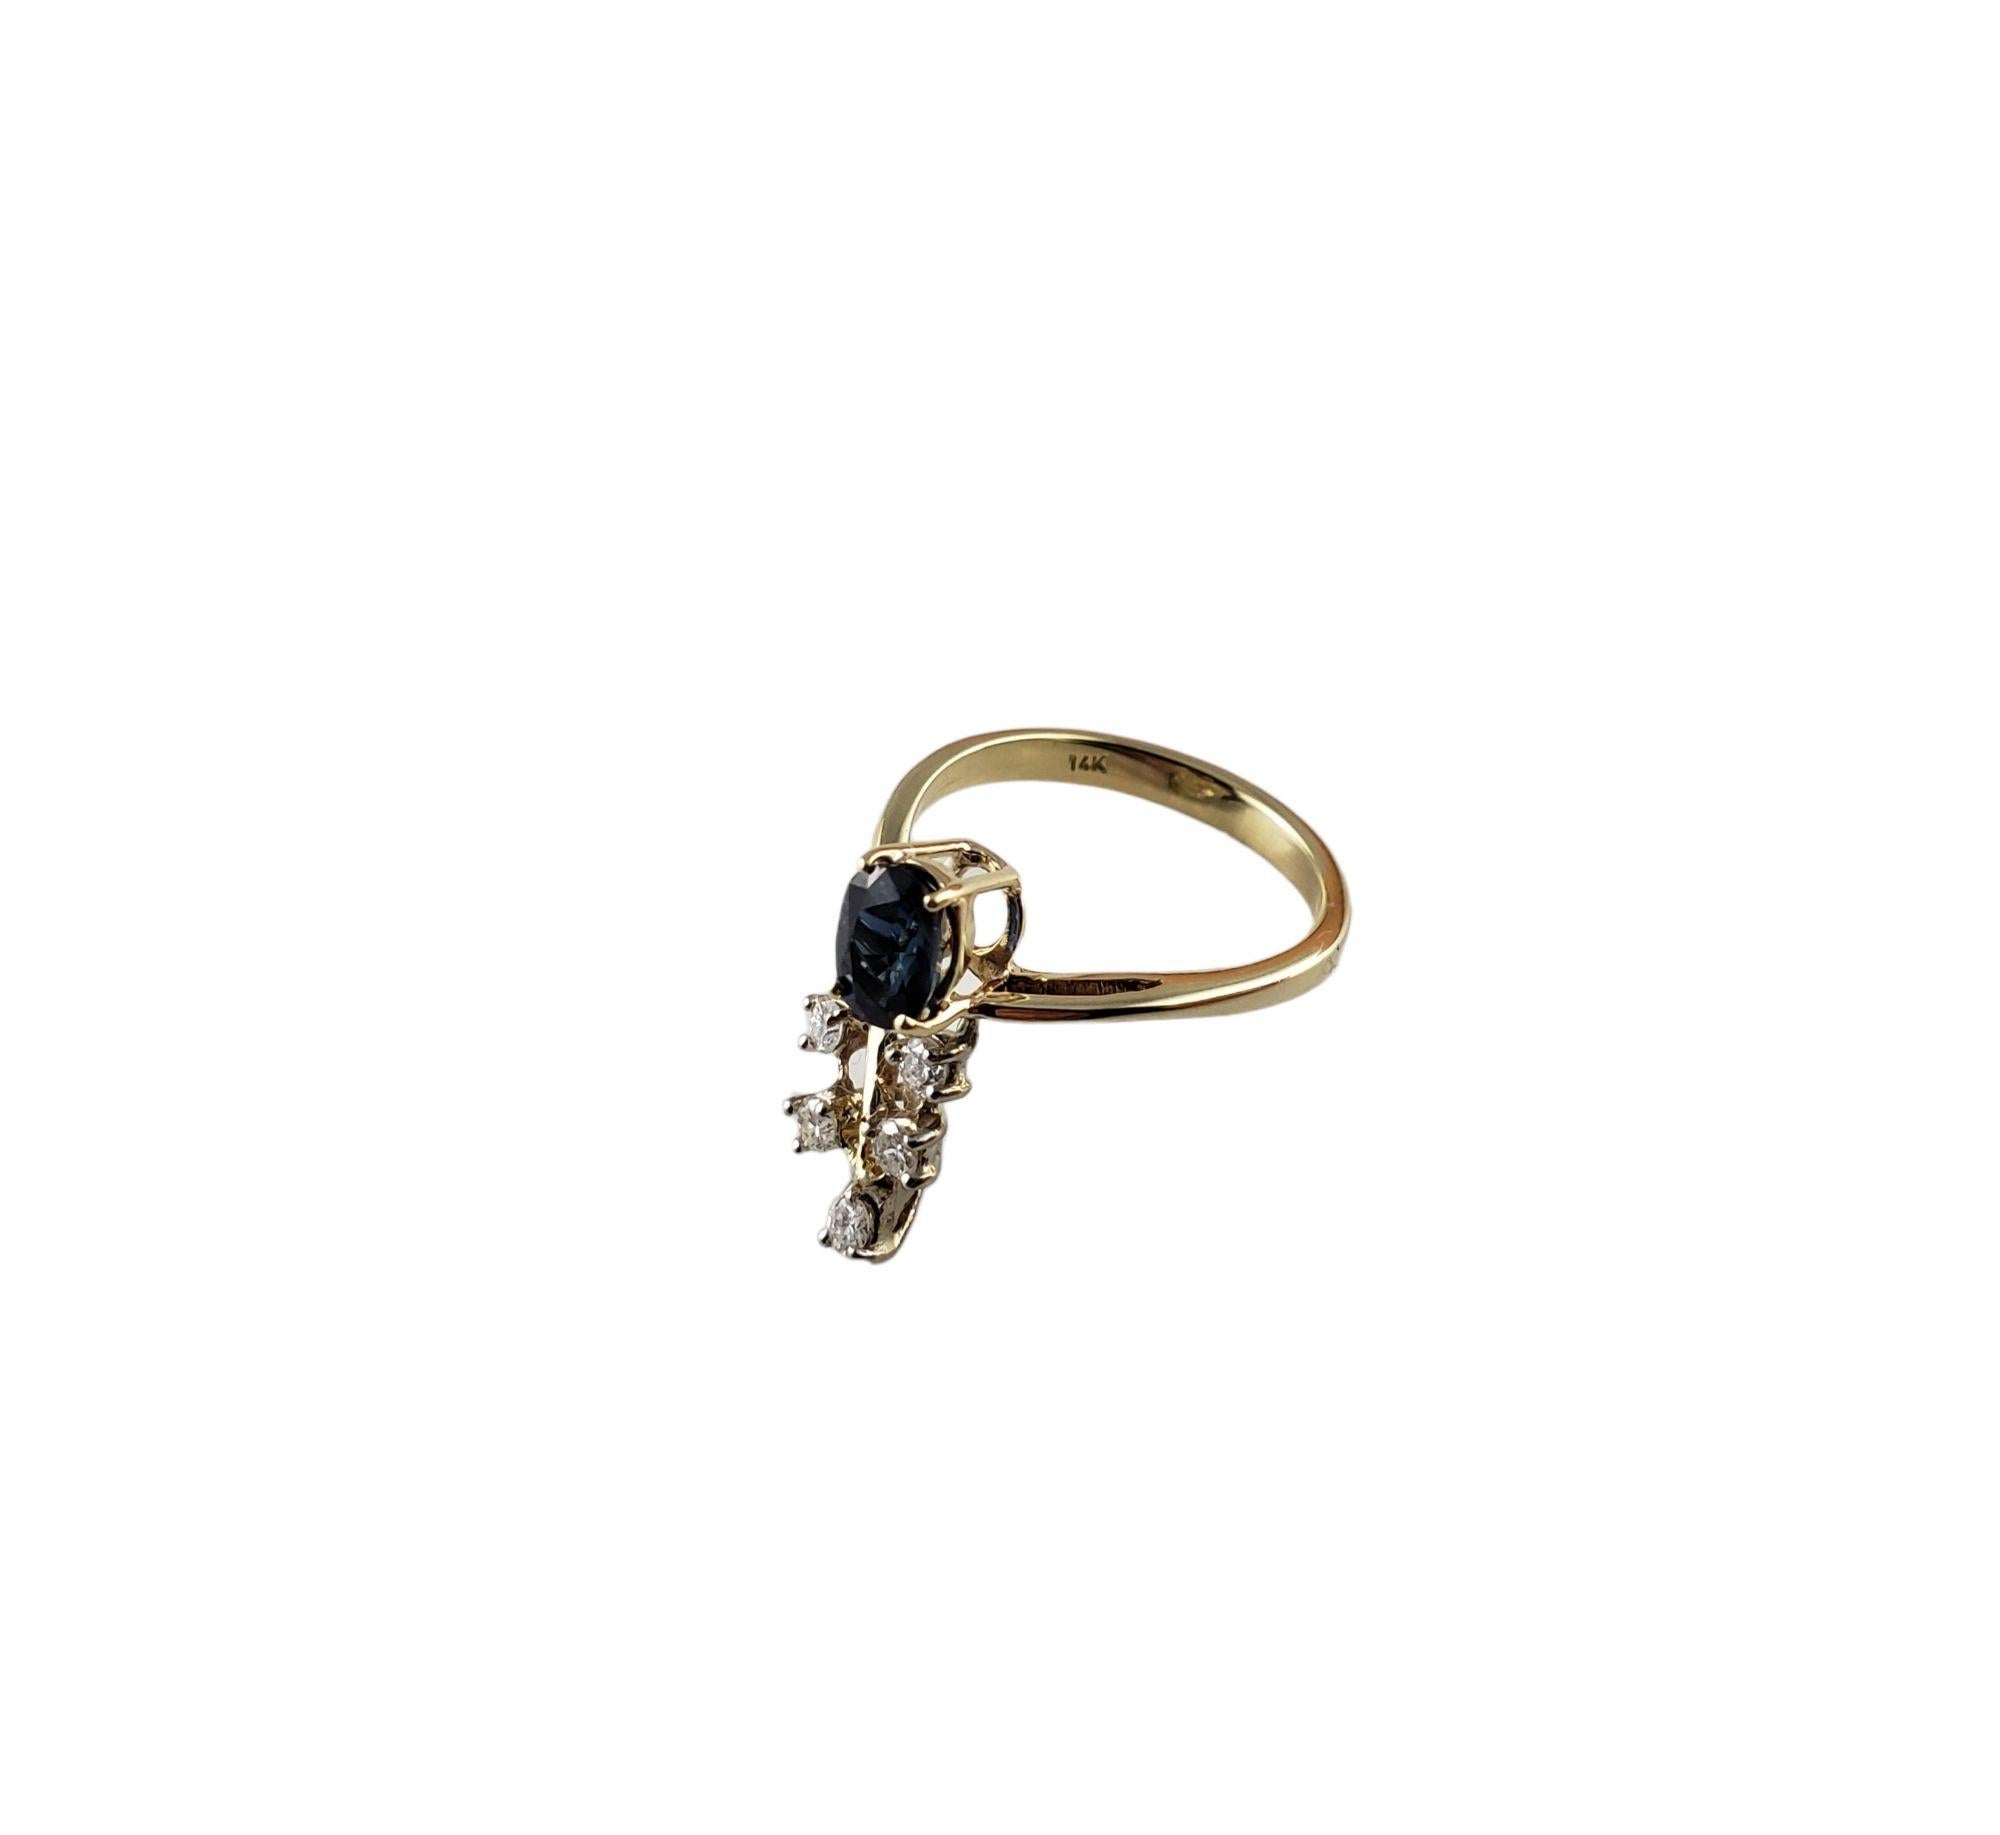 Vintage 14 Karat Yellow Gold Sapphire and Diamond Ring Size 5-

This lovely ring features one oval sapphire (6 mm x 4 mm) and five round brilliant cut diamonds set in classic 14K yellow gold.
Width: 16 mm. Shank: 2 mm.

Approximate total diamond